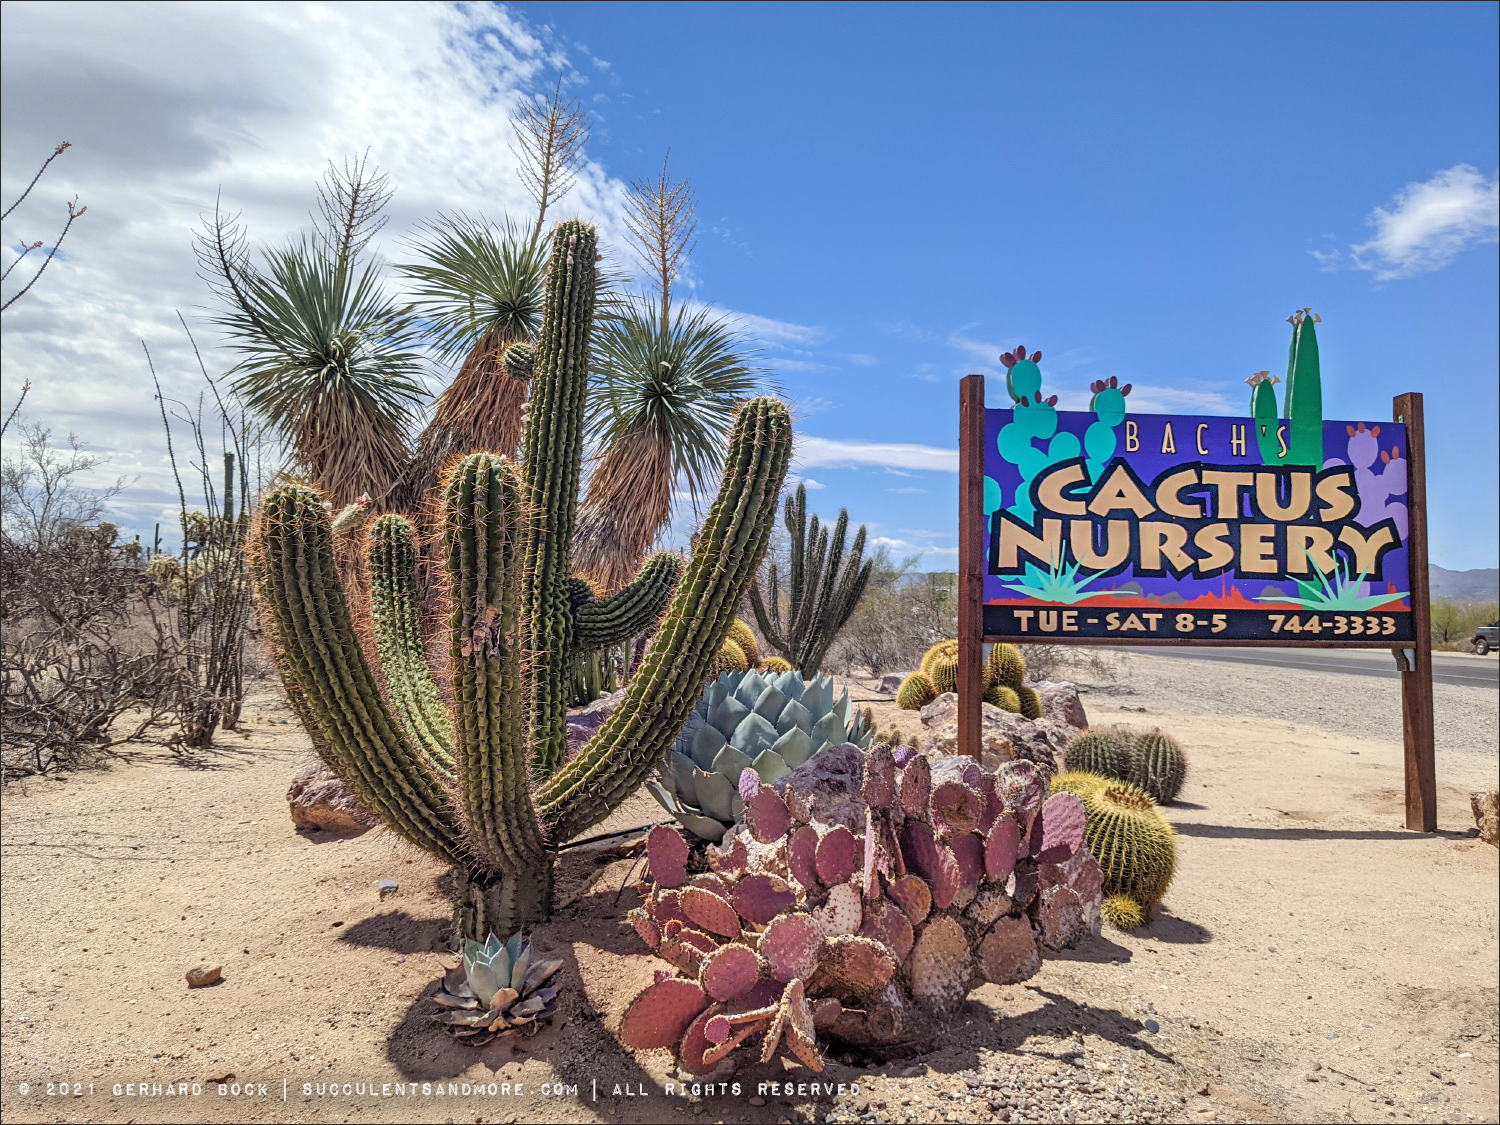 Bach's Cactus Nursery, a must see destination in Tucson, AZ May 20